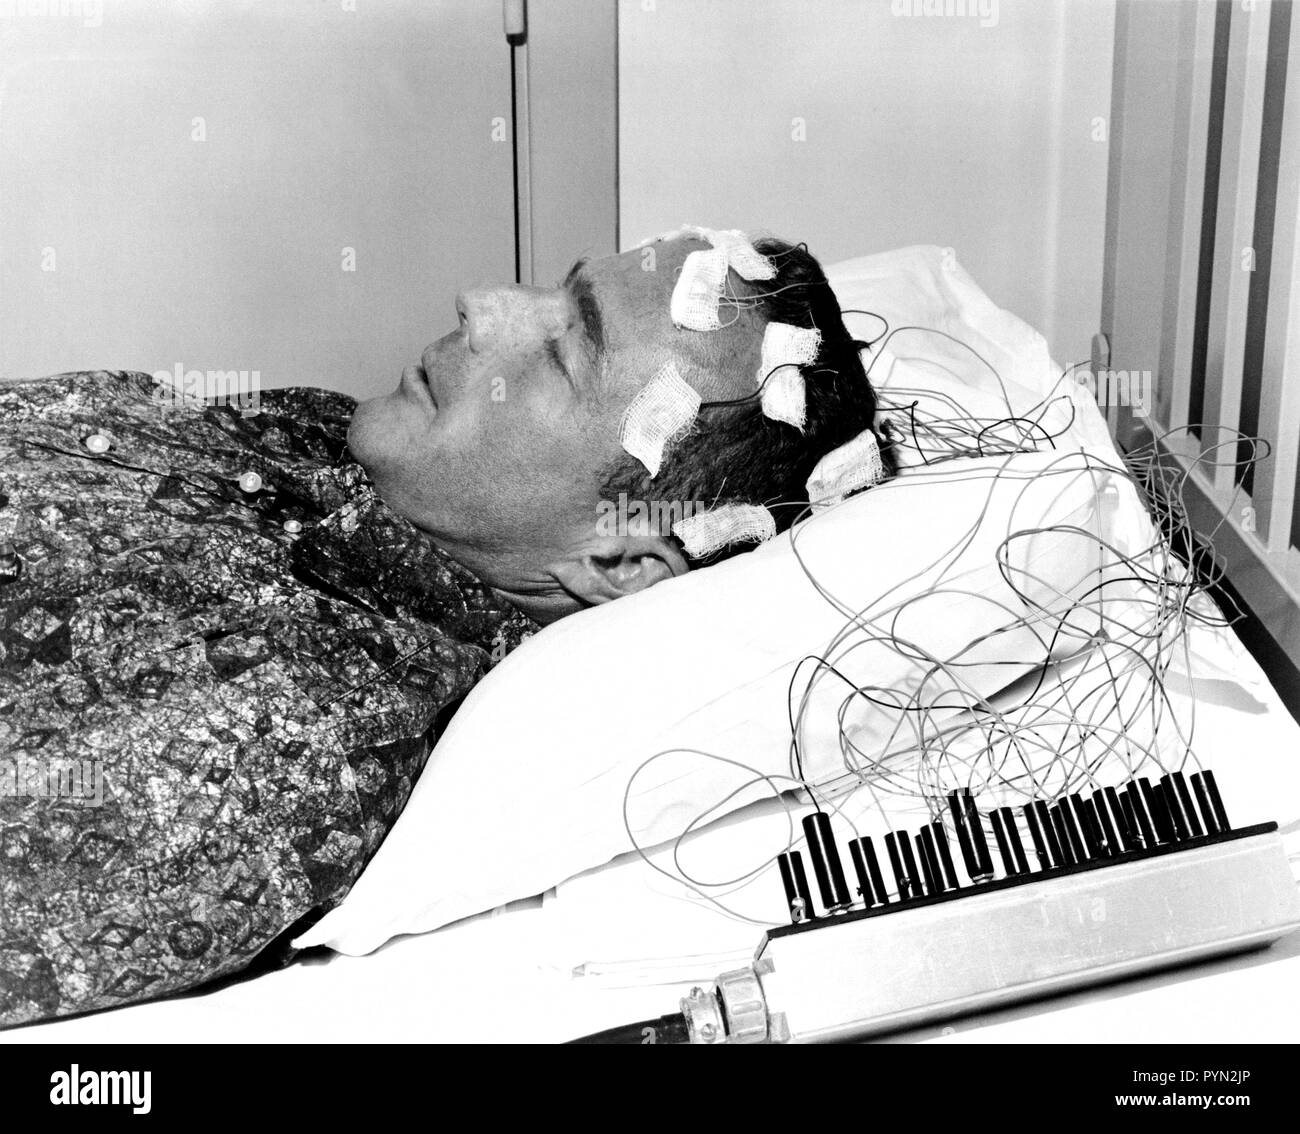 (1962) --- Mercury astronaut M. Scott Carpenter lies on a bed with biosensors attached to his head during astronaut training activities at Cape Canaveral Stock Photo